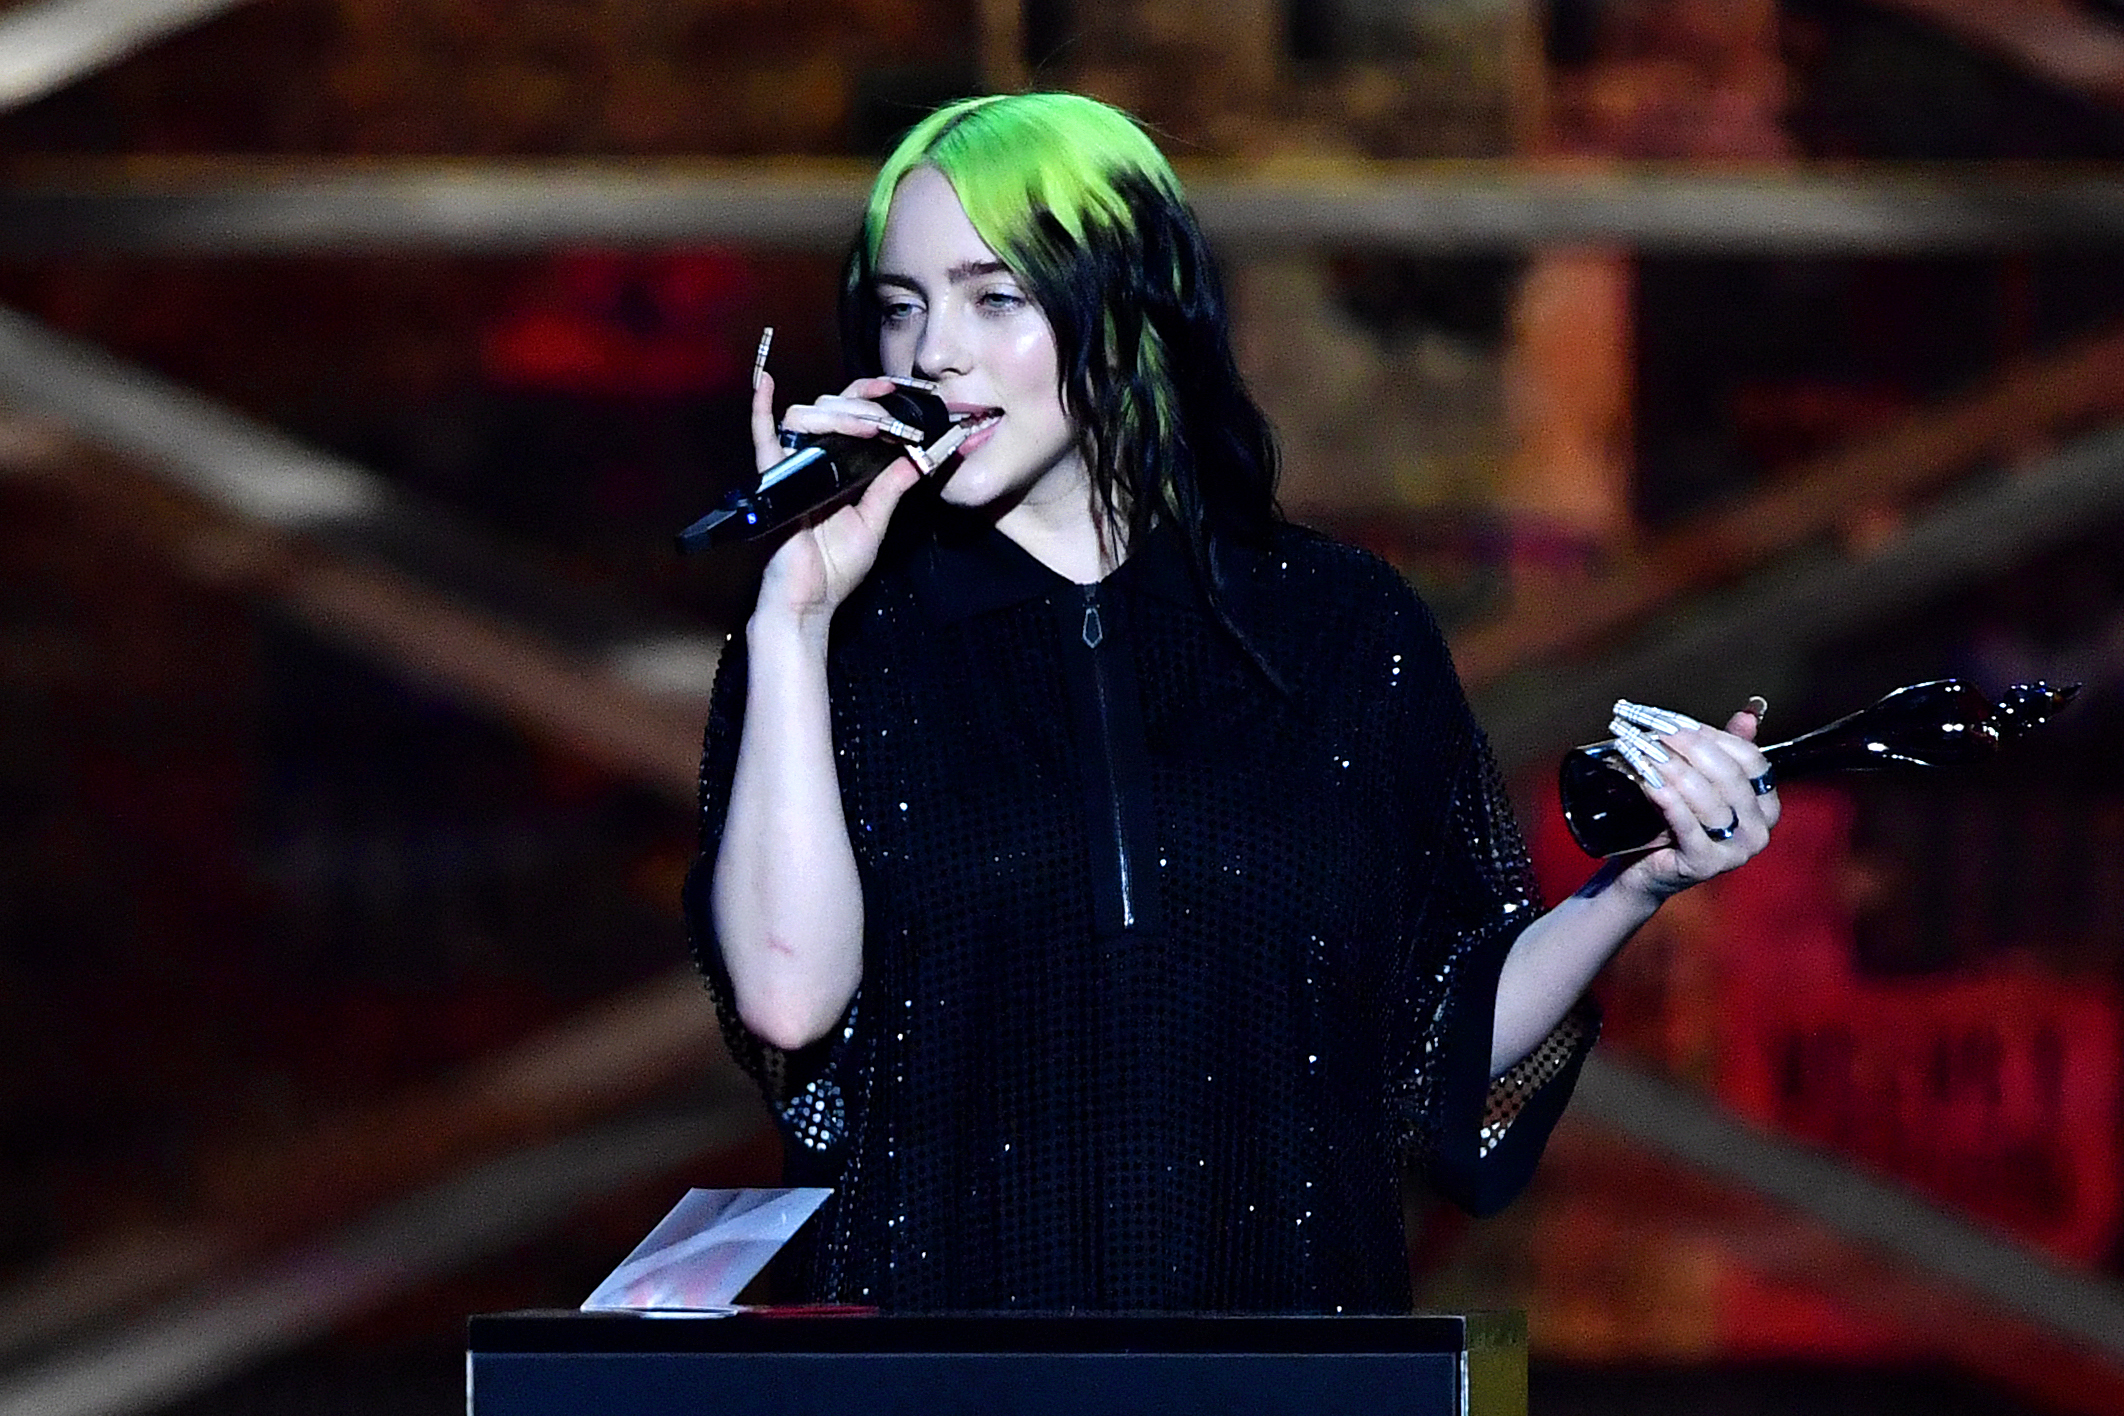 Hans Zimmer on how he helped Billie Eilish produce 'No Time To Die